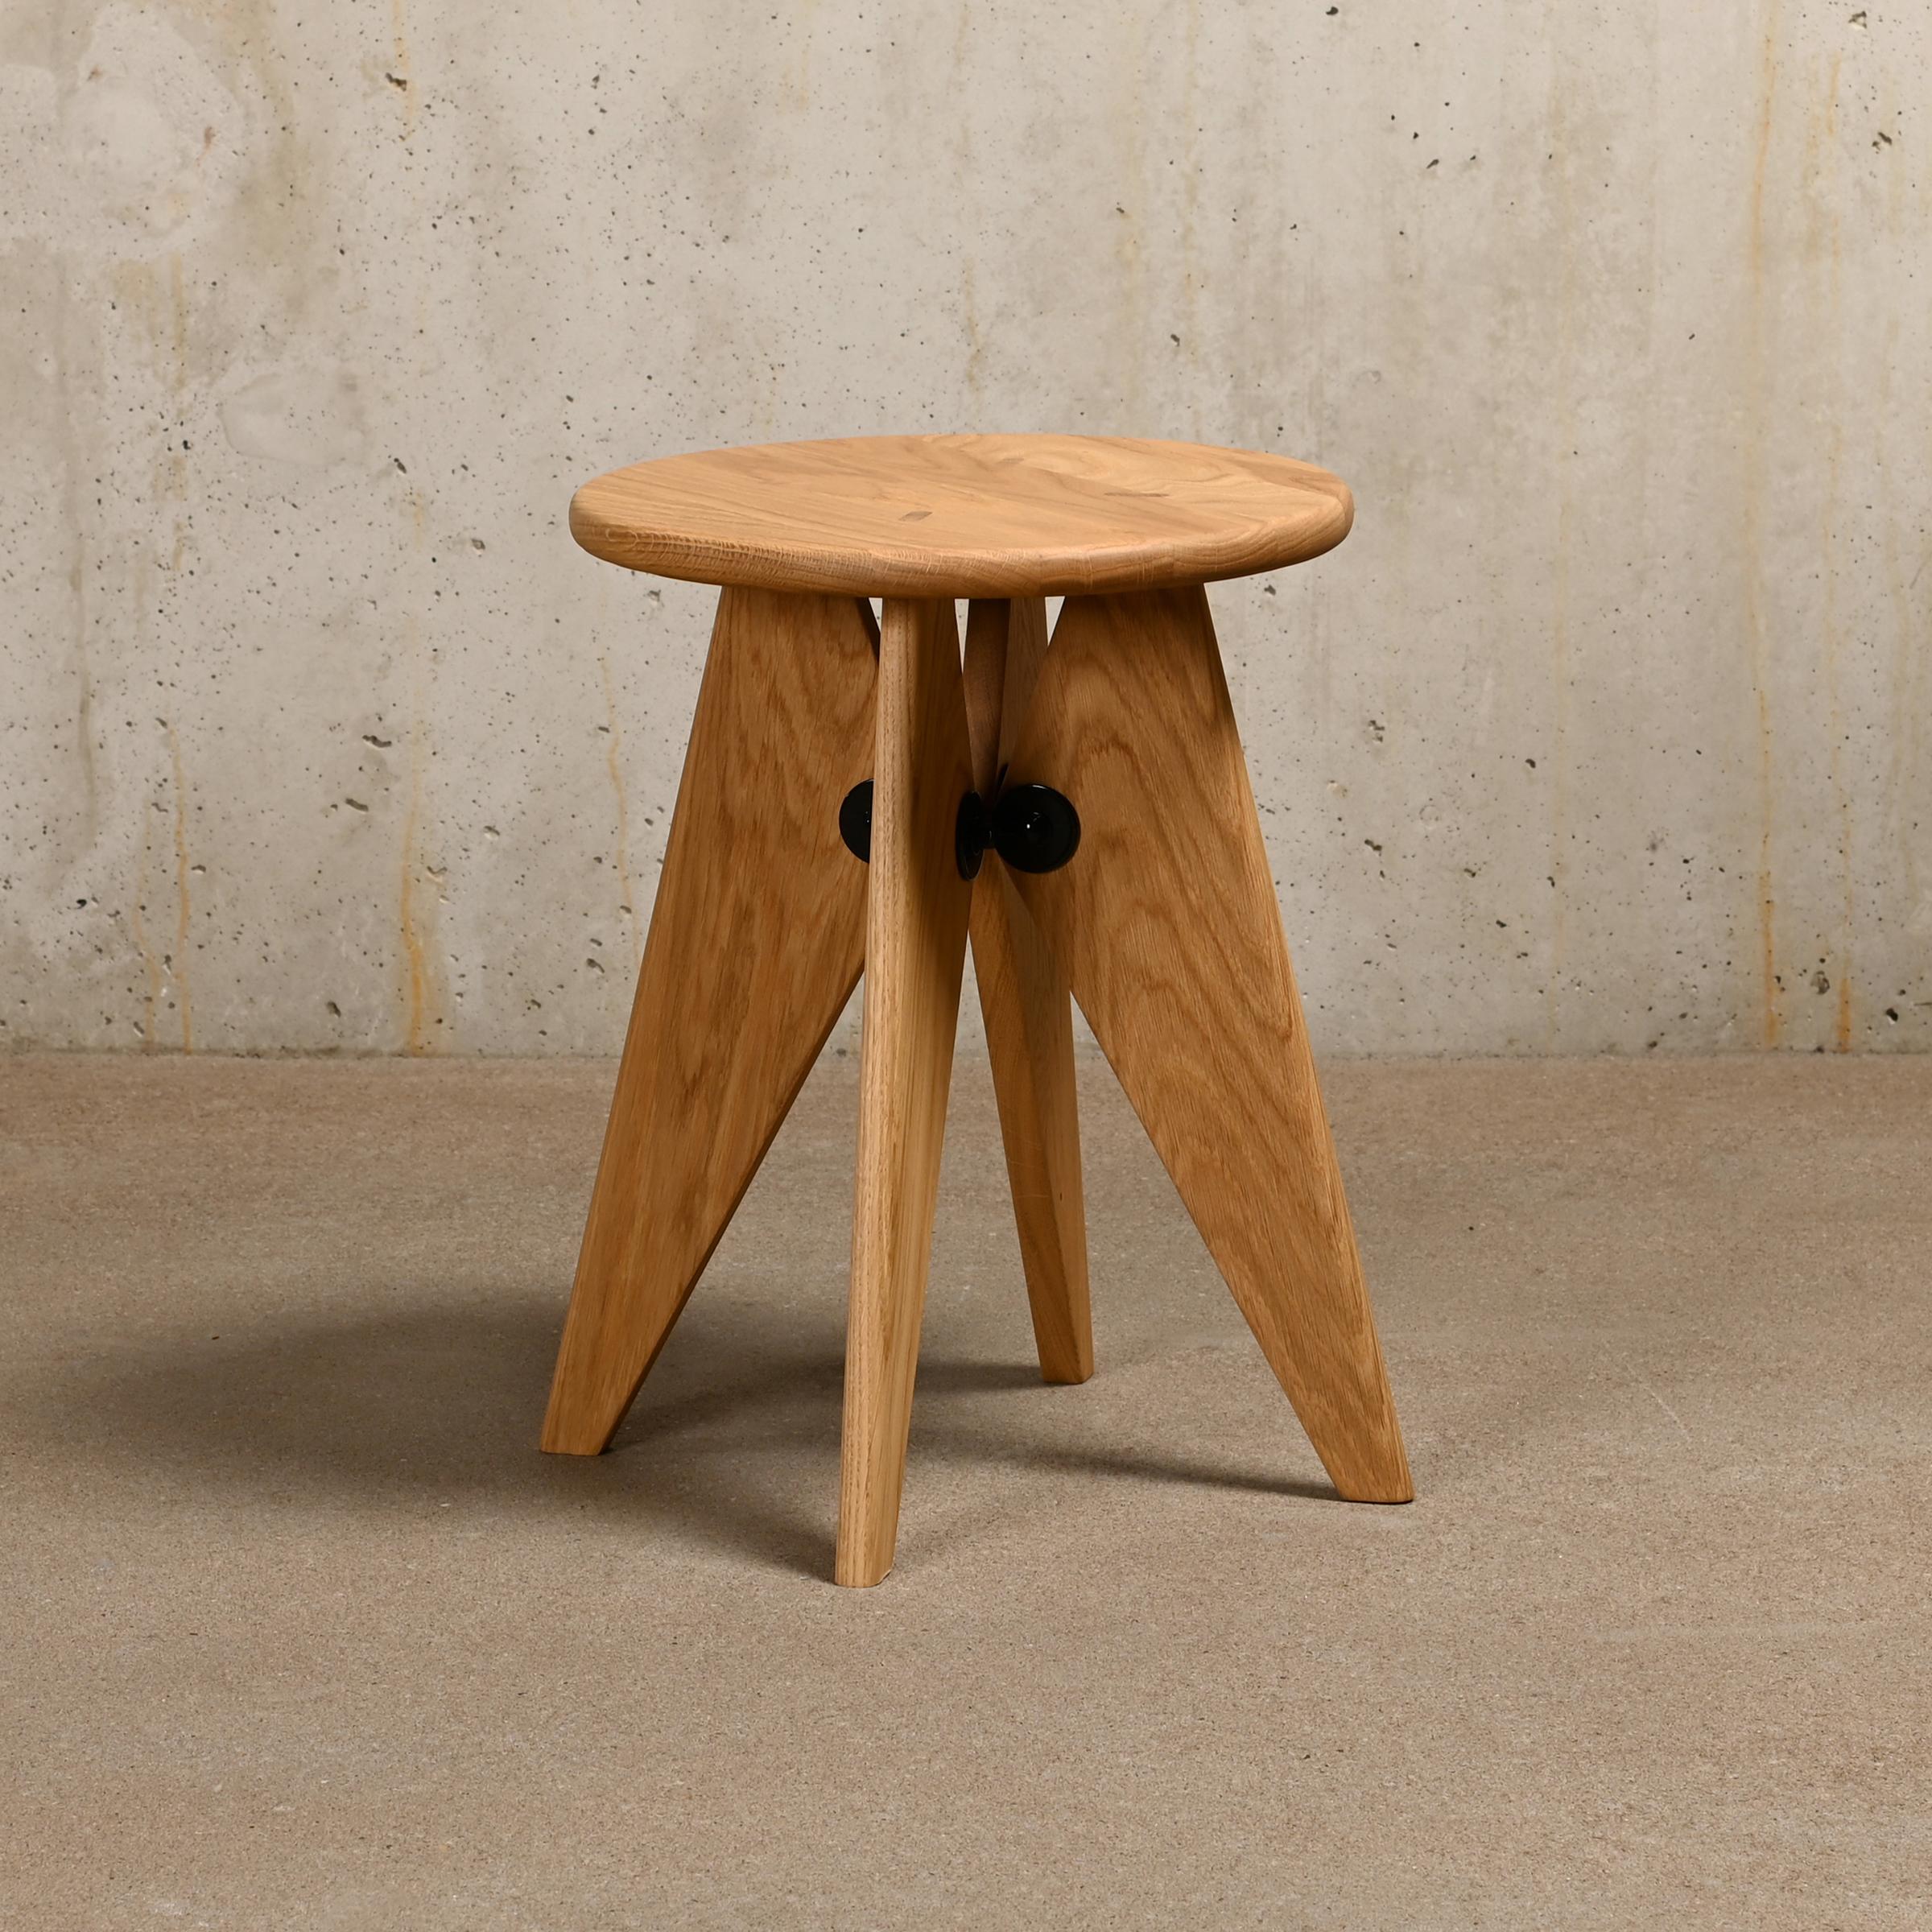 Mid-Century Modern Jean Prouvé Tabouret Solvay / Bois Stool in Solid Natural Oak by Vitra For Sale